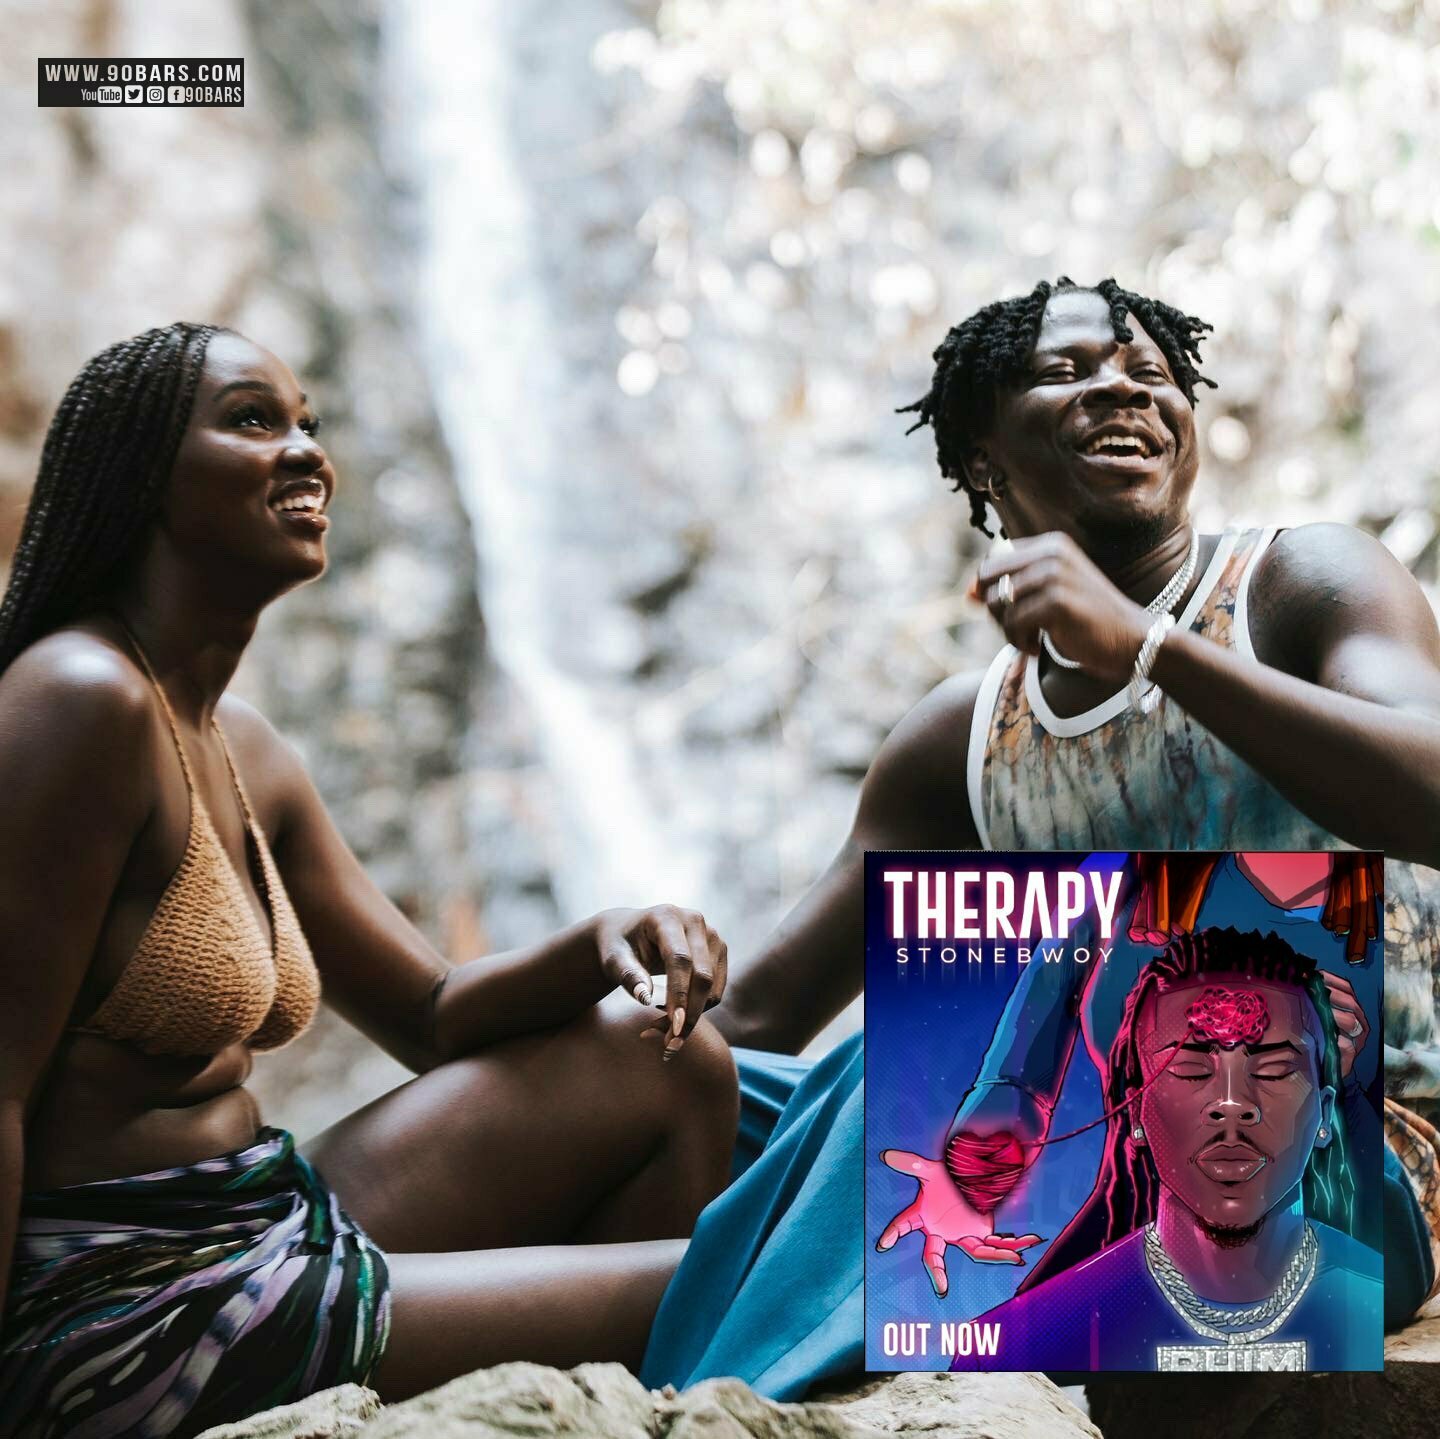 Stonebwoy Announces 'Therapy' Video Release Date